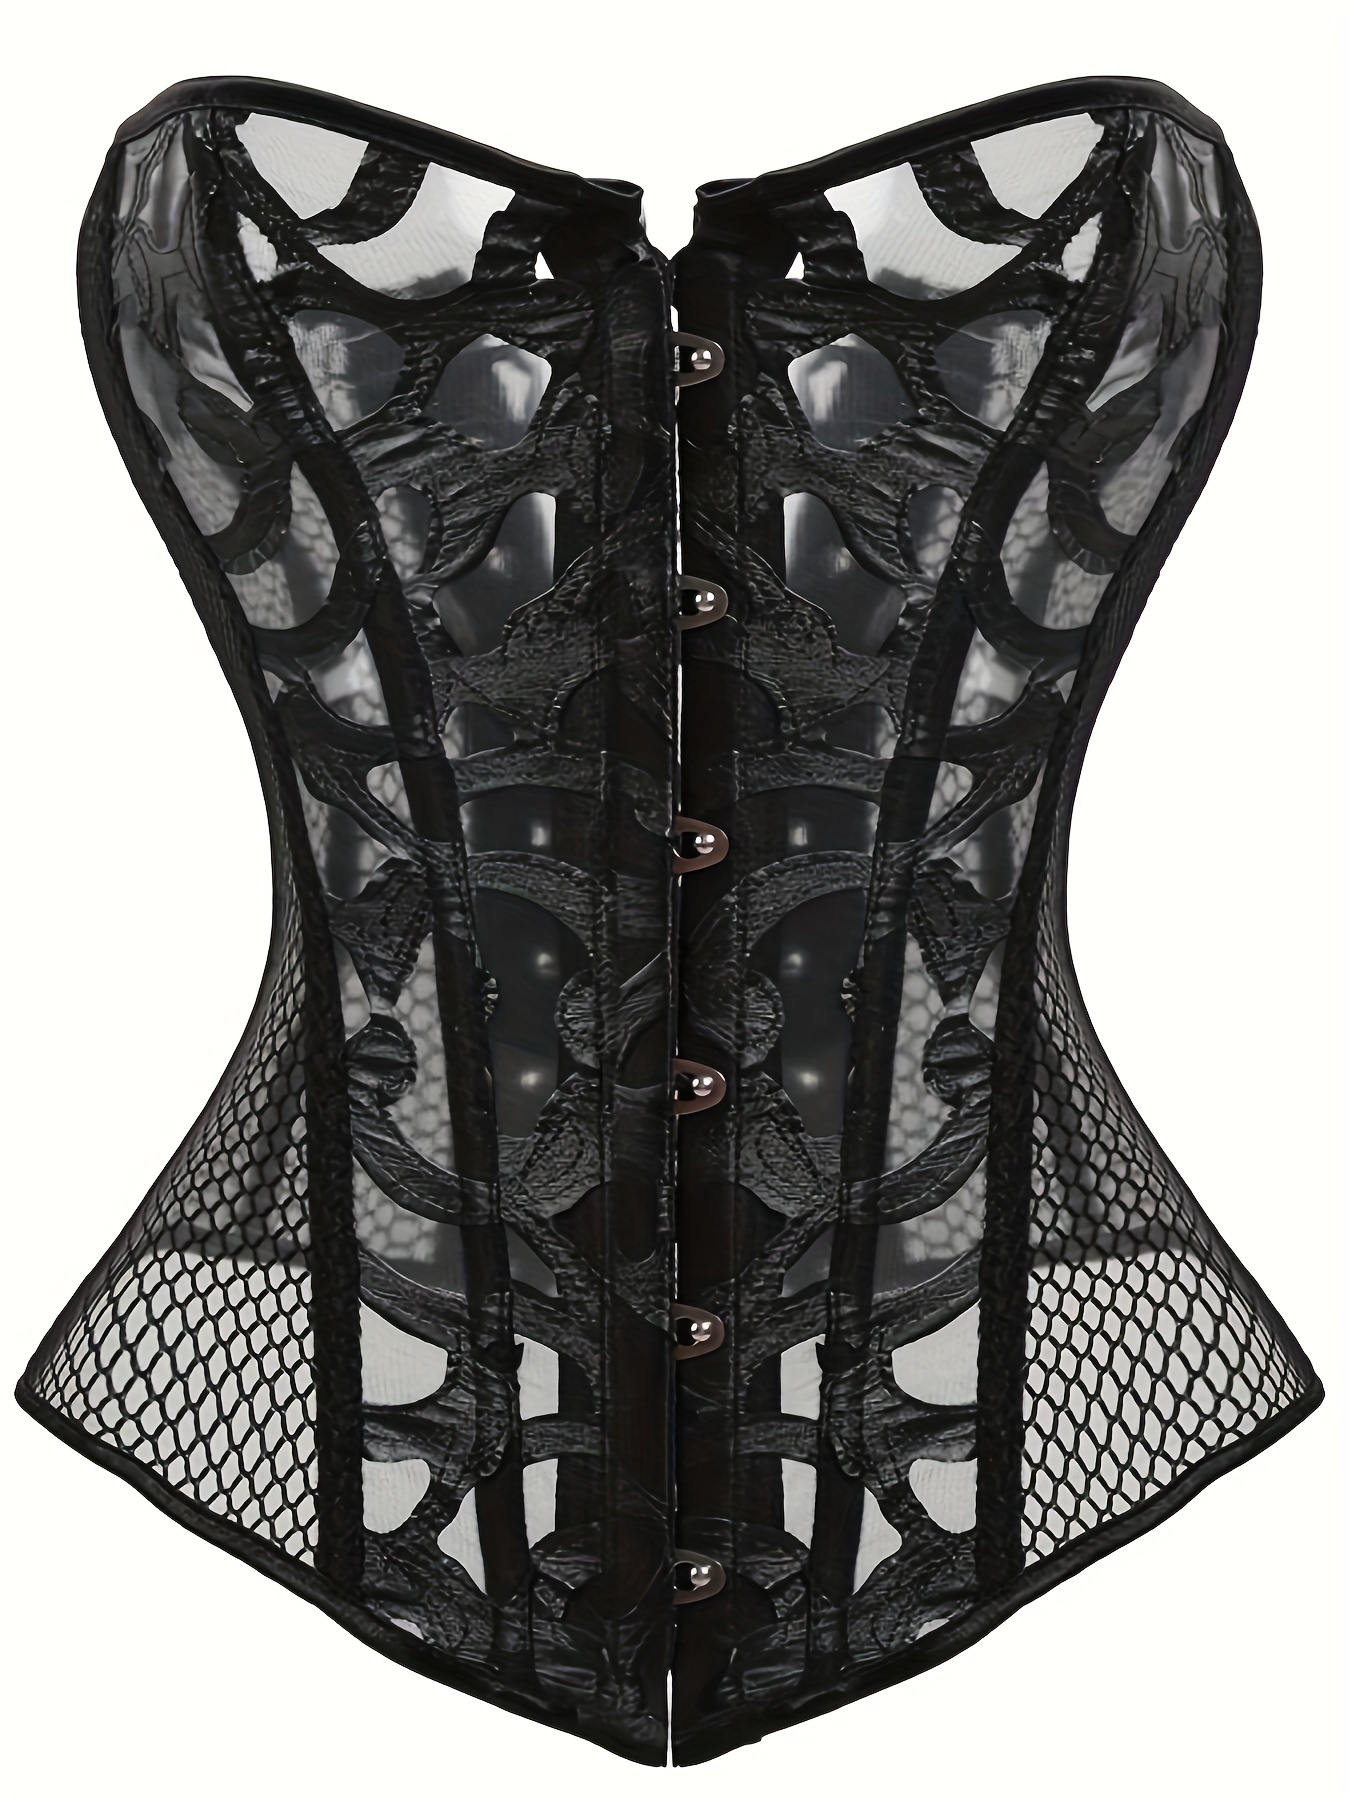 BrilliantMe Women's Push Up Corsets Strapless Lace Up Bustiers Shapewear  Waist Trainer Black S 